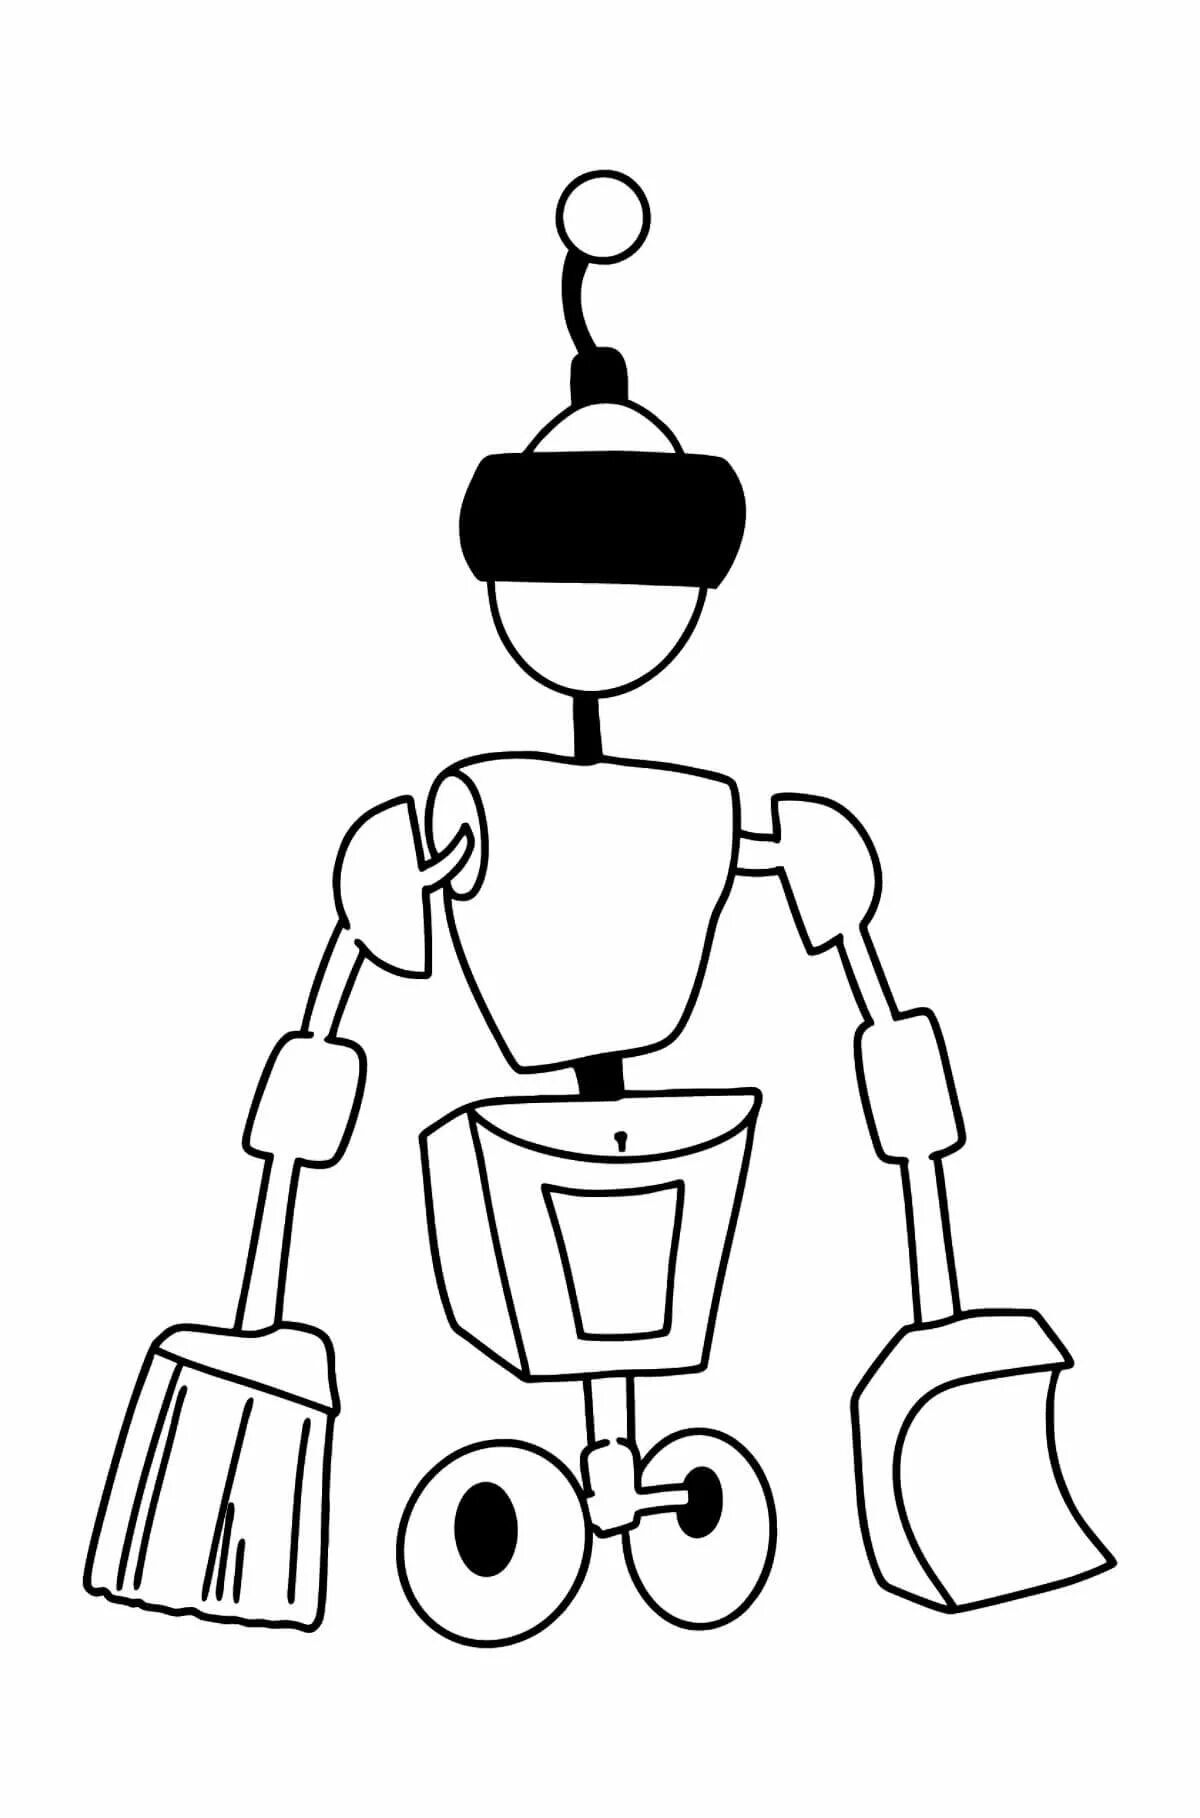 Coloring book witty robot teacher